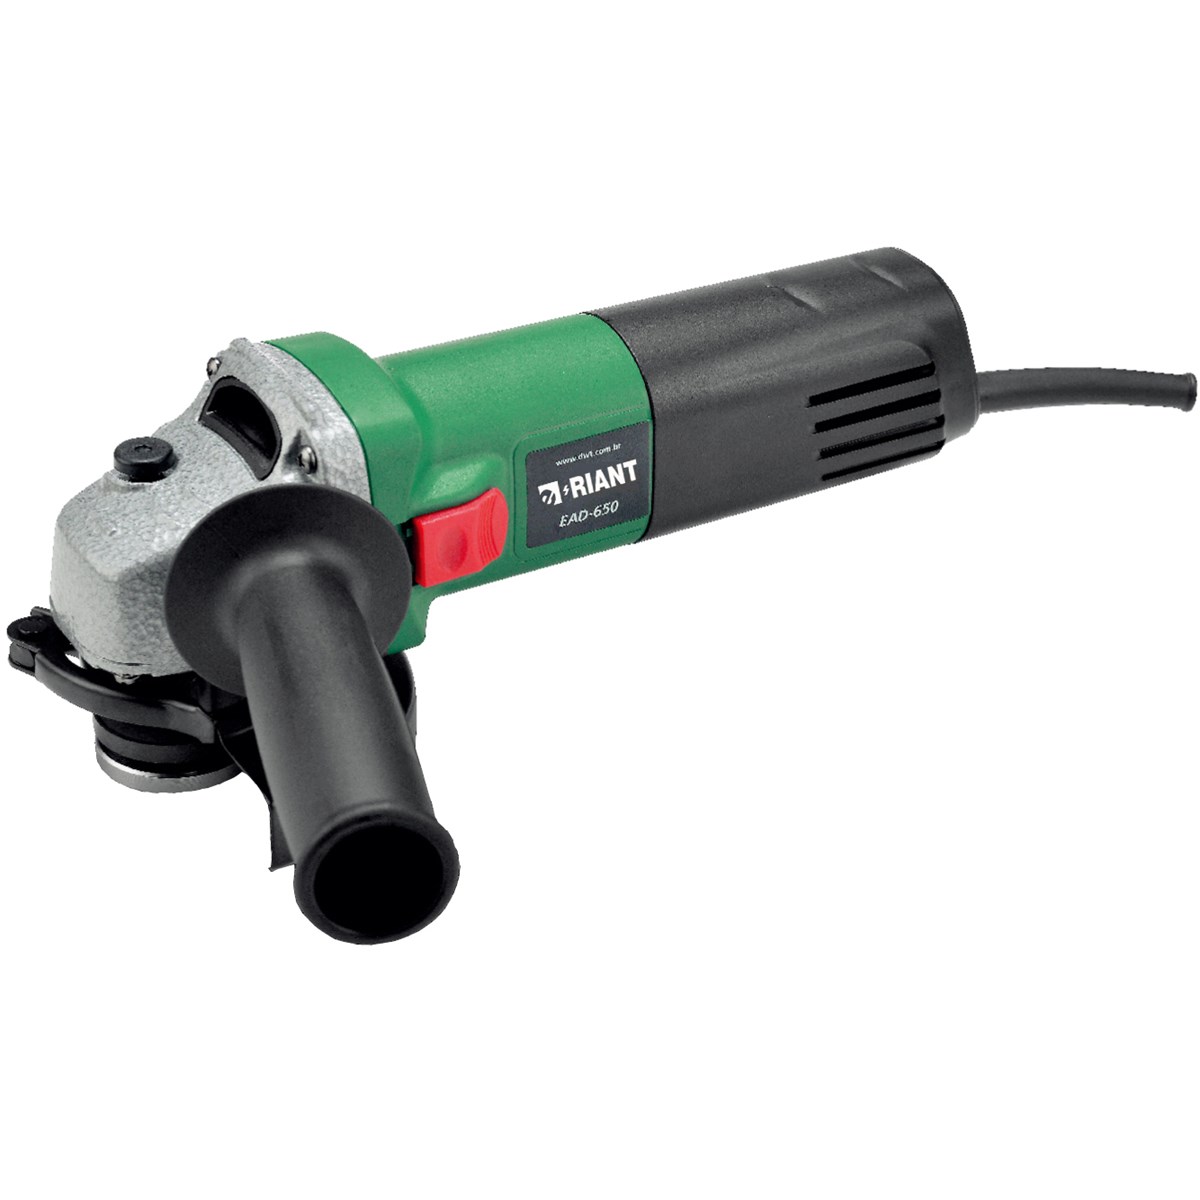 650W 100mm 115mm electric angle grinder